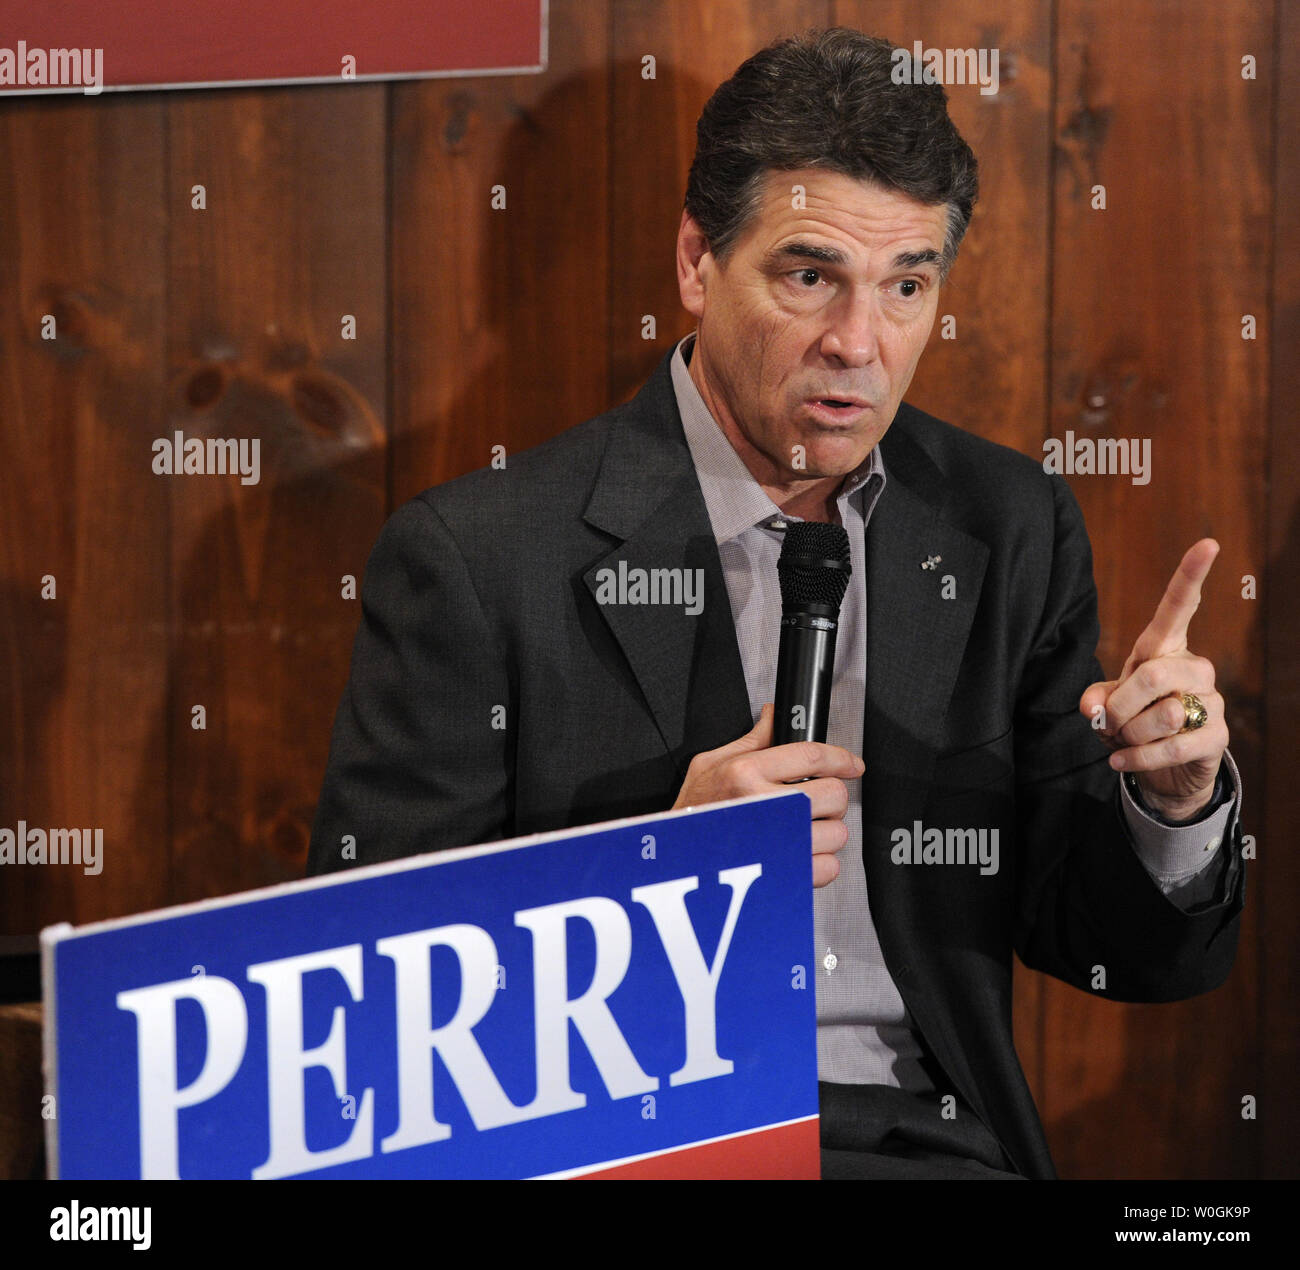 Republican 2012 presidential candidate and Texas Gov. Rick Perry responds to a question from a supporter during a campaign stop at The Fainting Goat Bar and Grill in Waverly, Iowa, December 30, 2011, in advance of Iowa's first-in-the-nation caucuses, January 3, 2012.    UPI/Mike Theiler Stock Photo